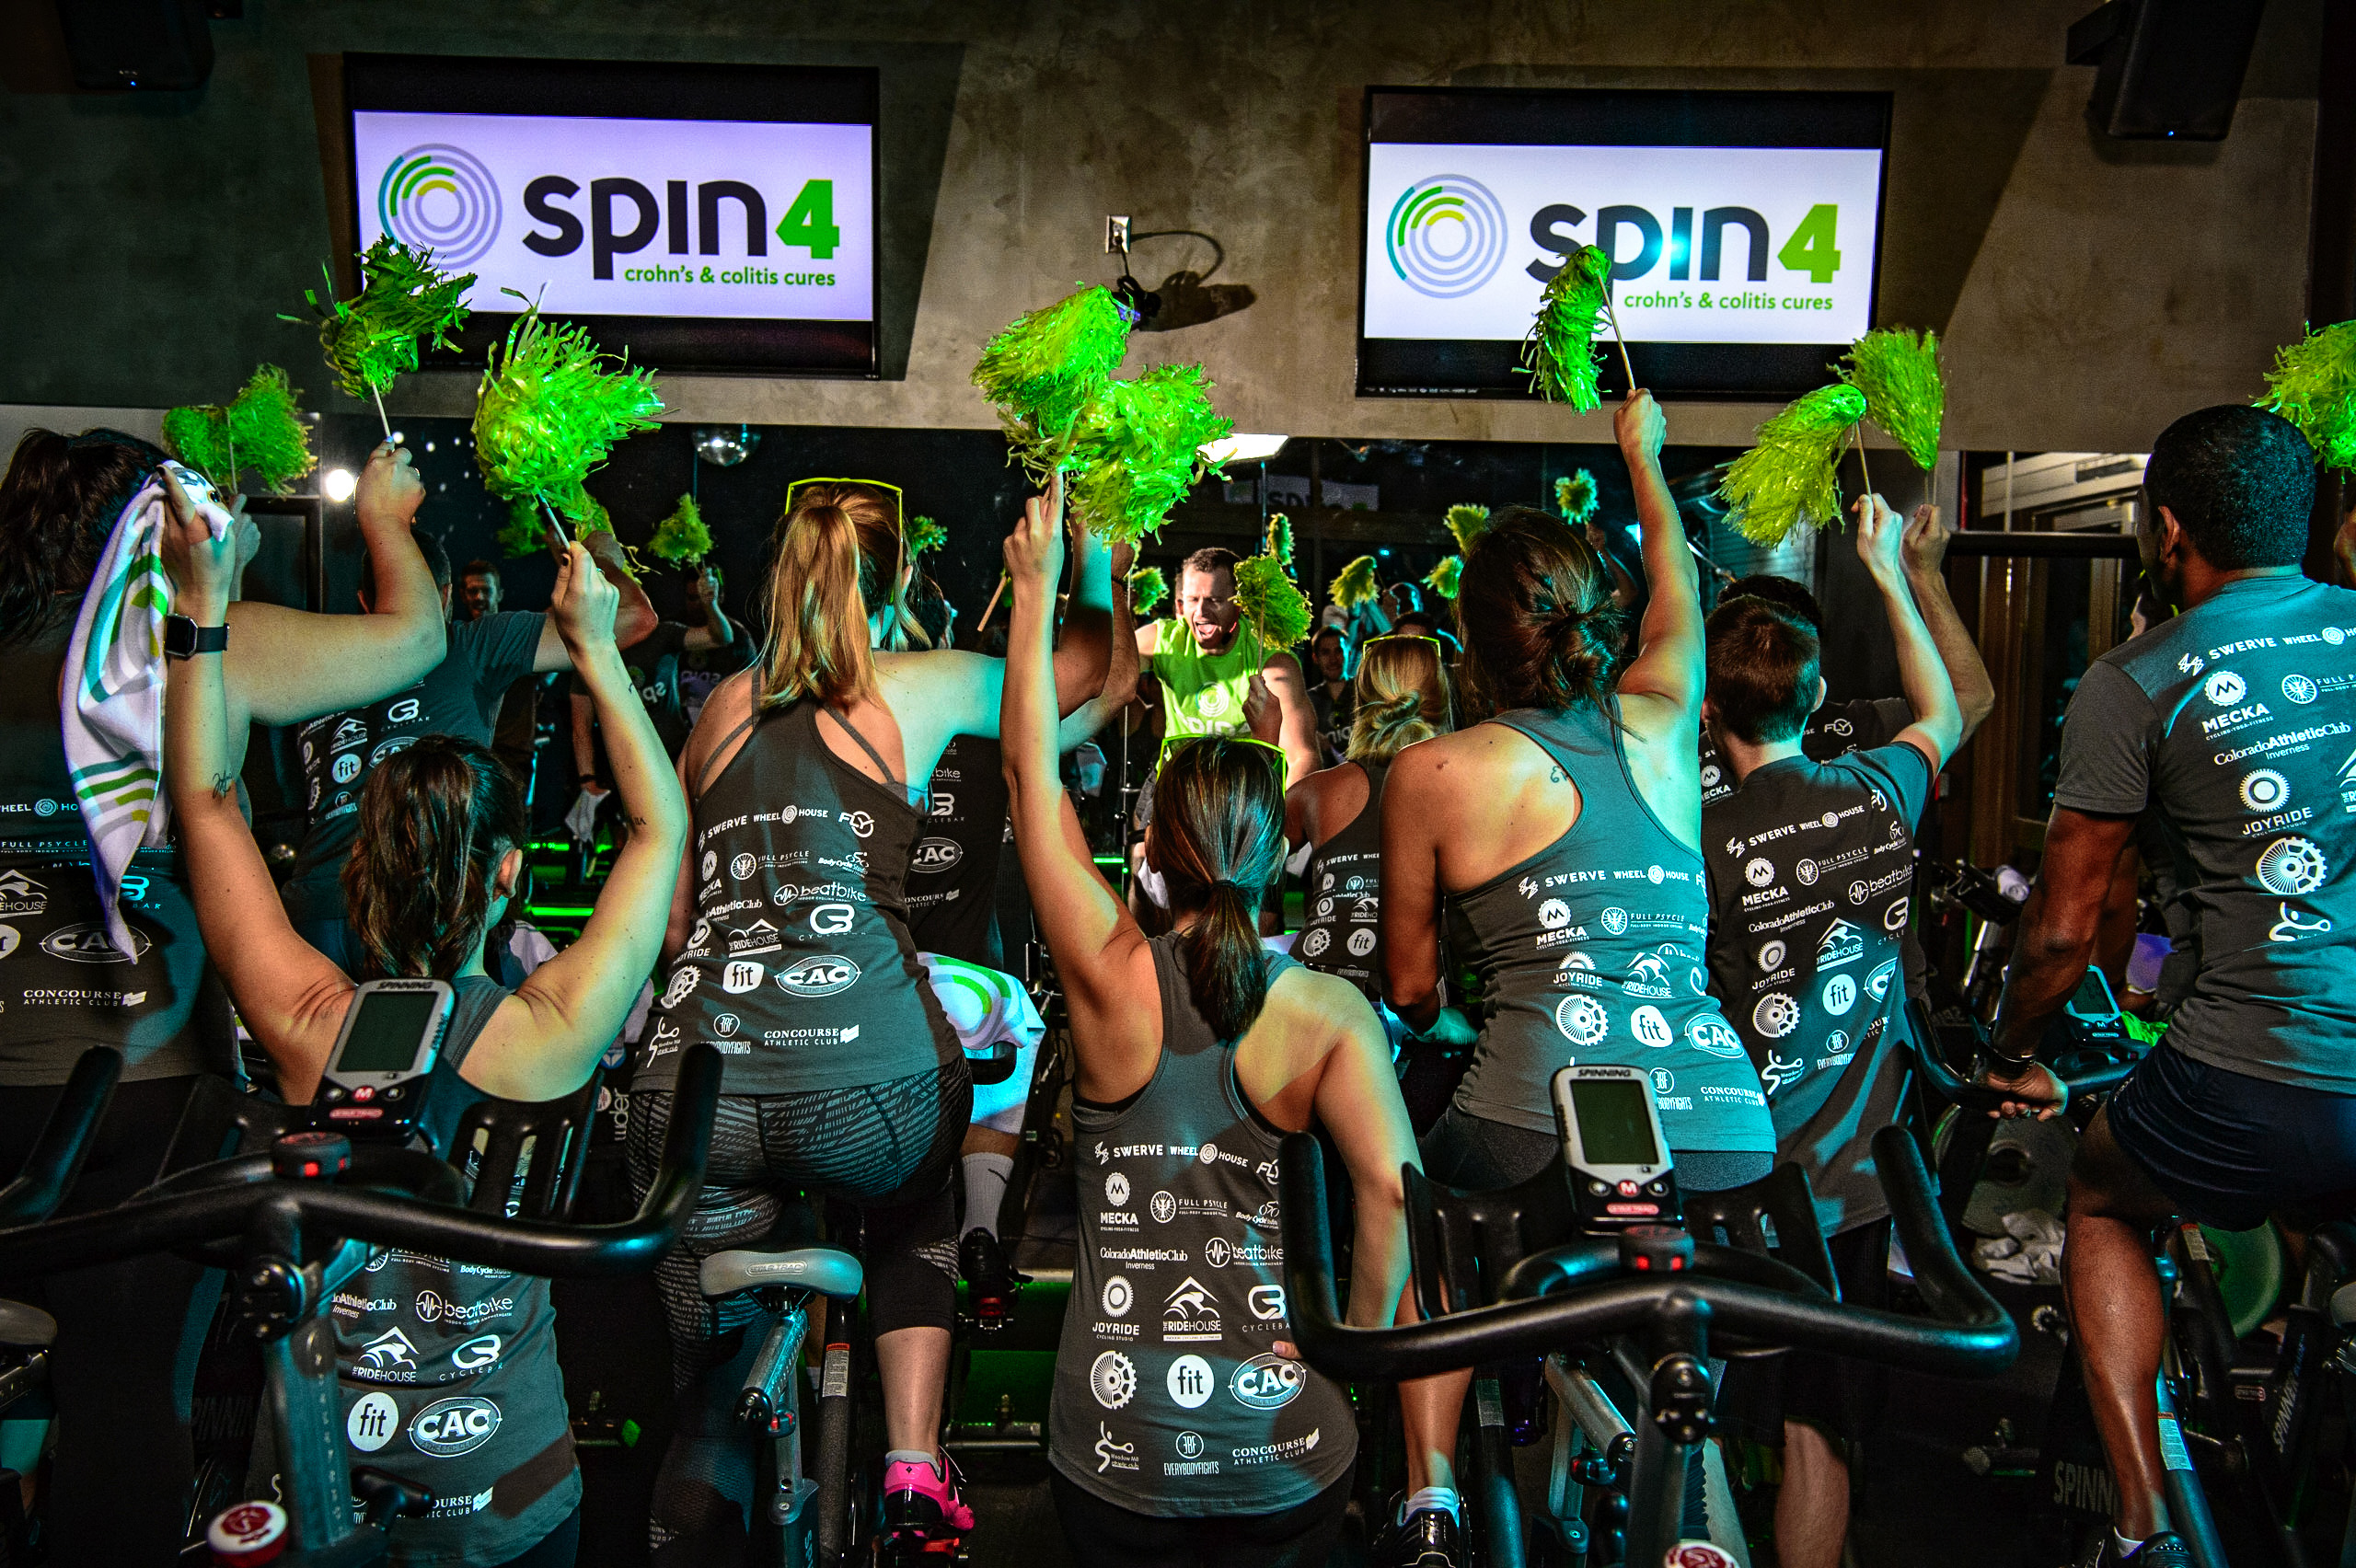 spin4 crohn’s & colitis cures in 2017